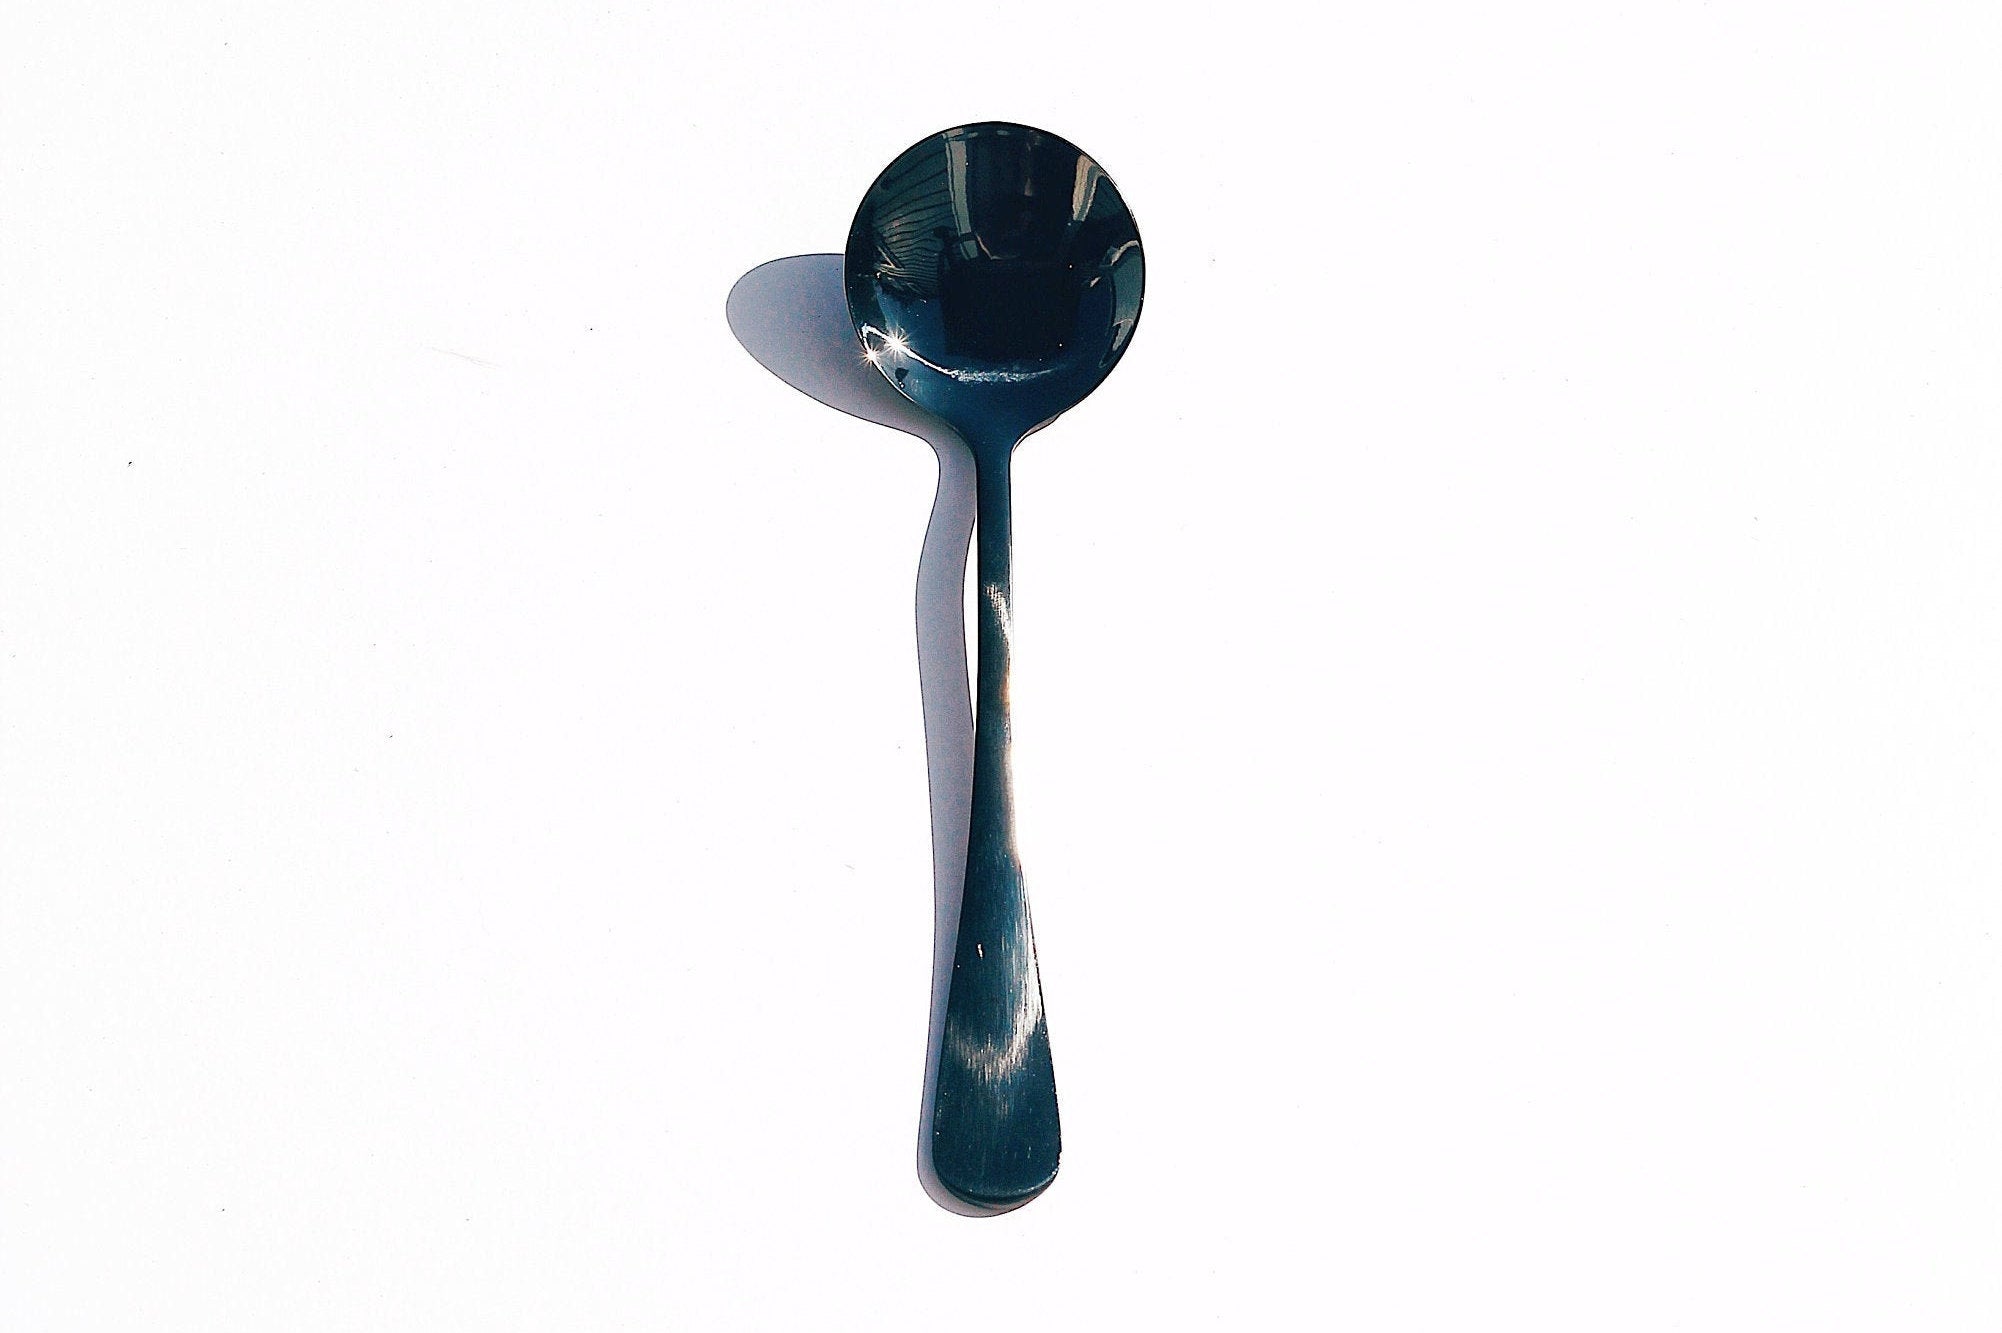 Umeshiso - Cupping Spoon | Goth Black